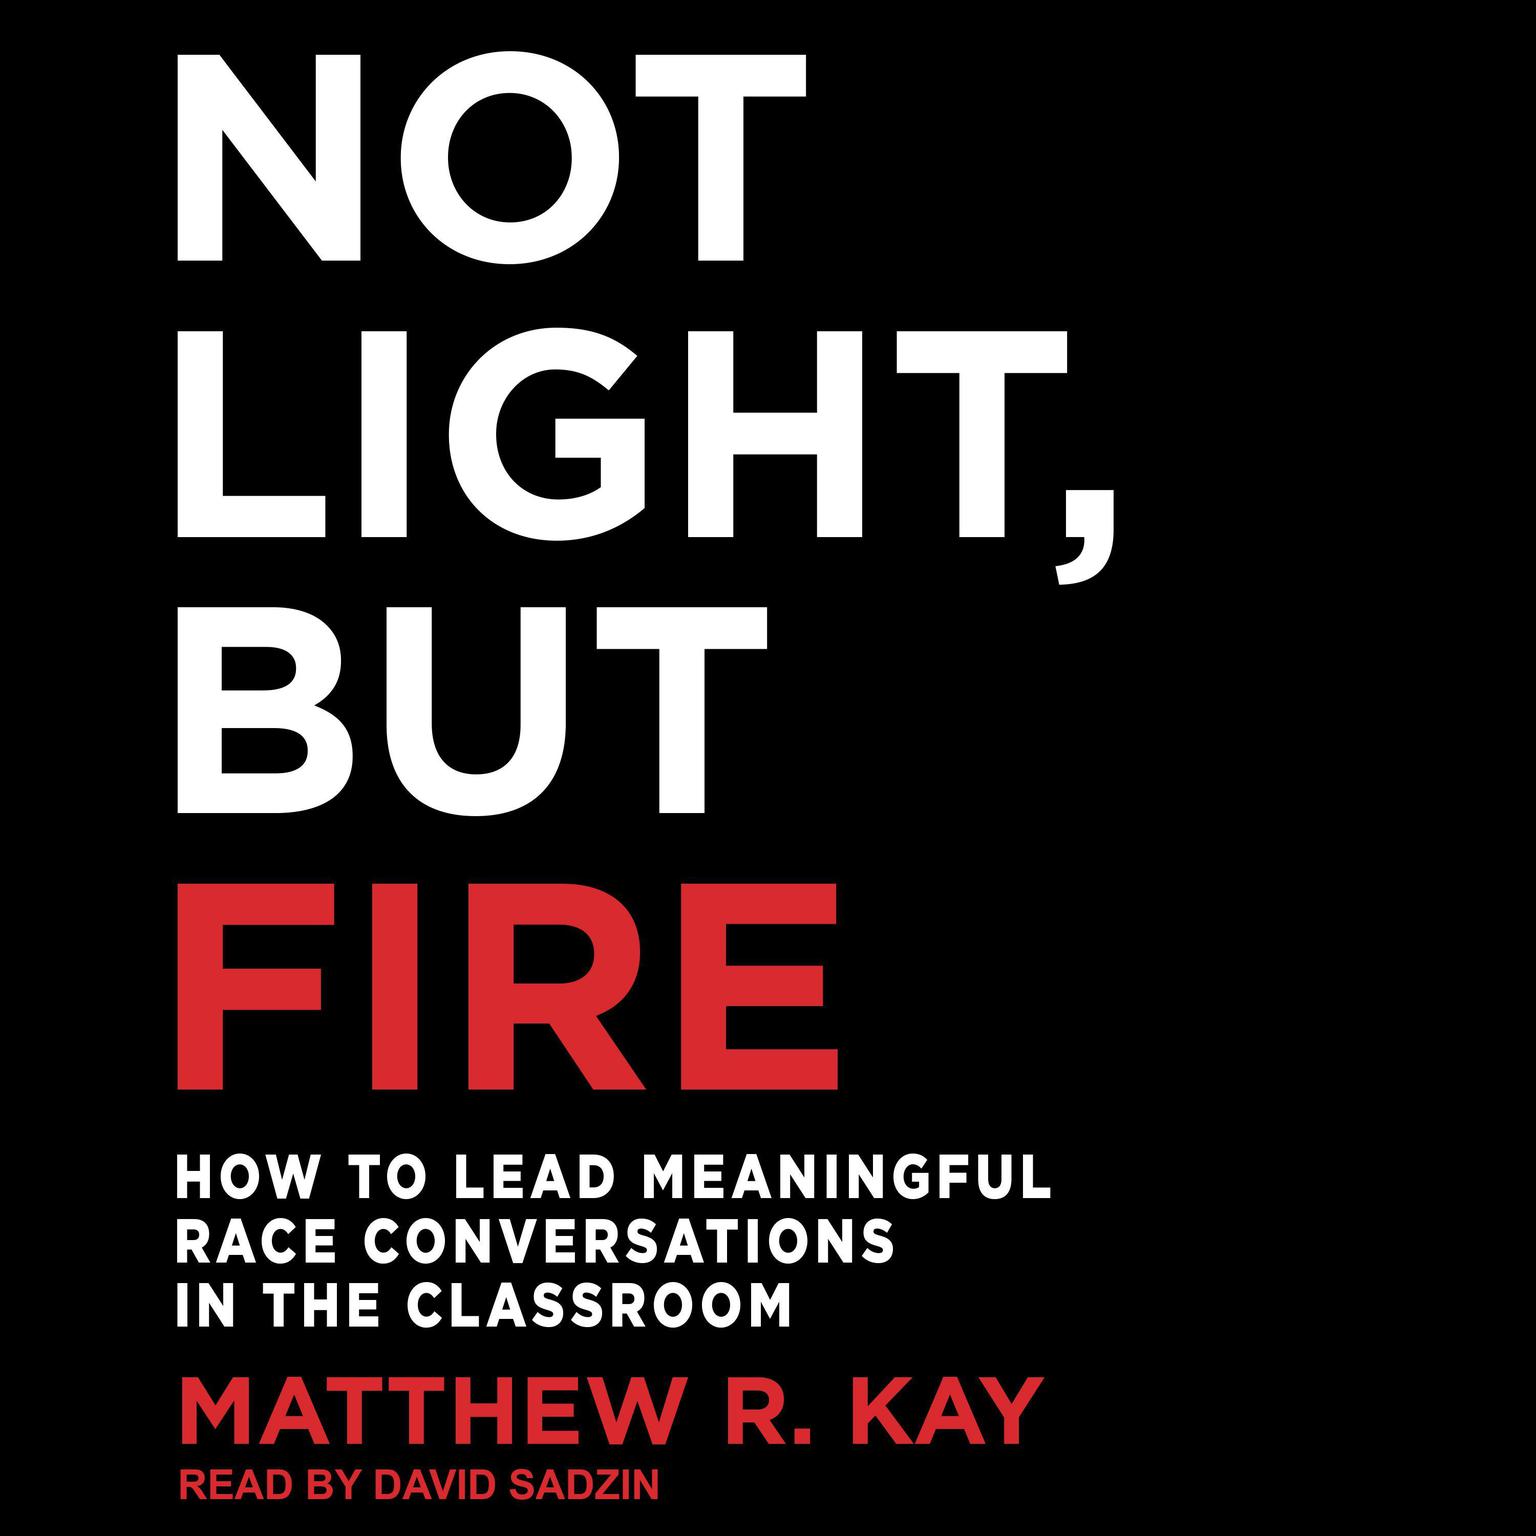 Not Light, but Fire: How to Lead Meaningful Race Conversations in the Classroom Audiobook, by Matthew R. Kay